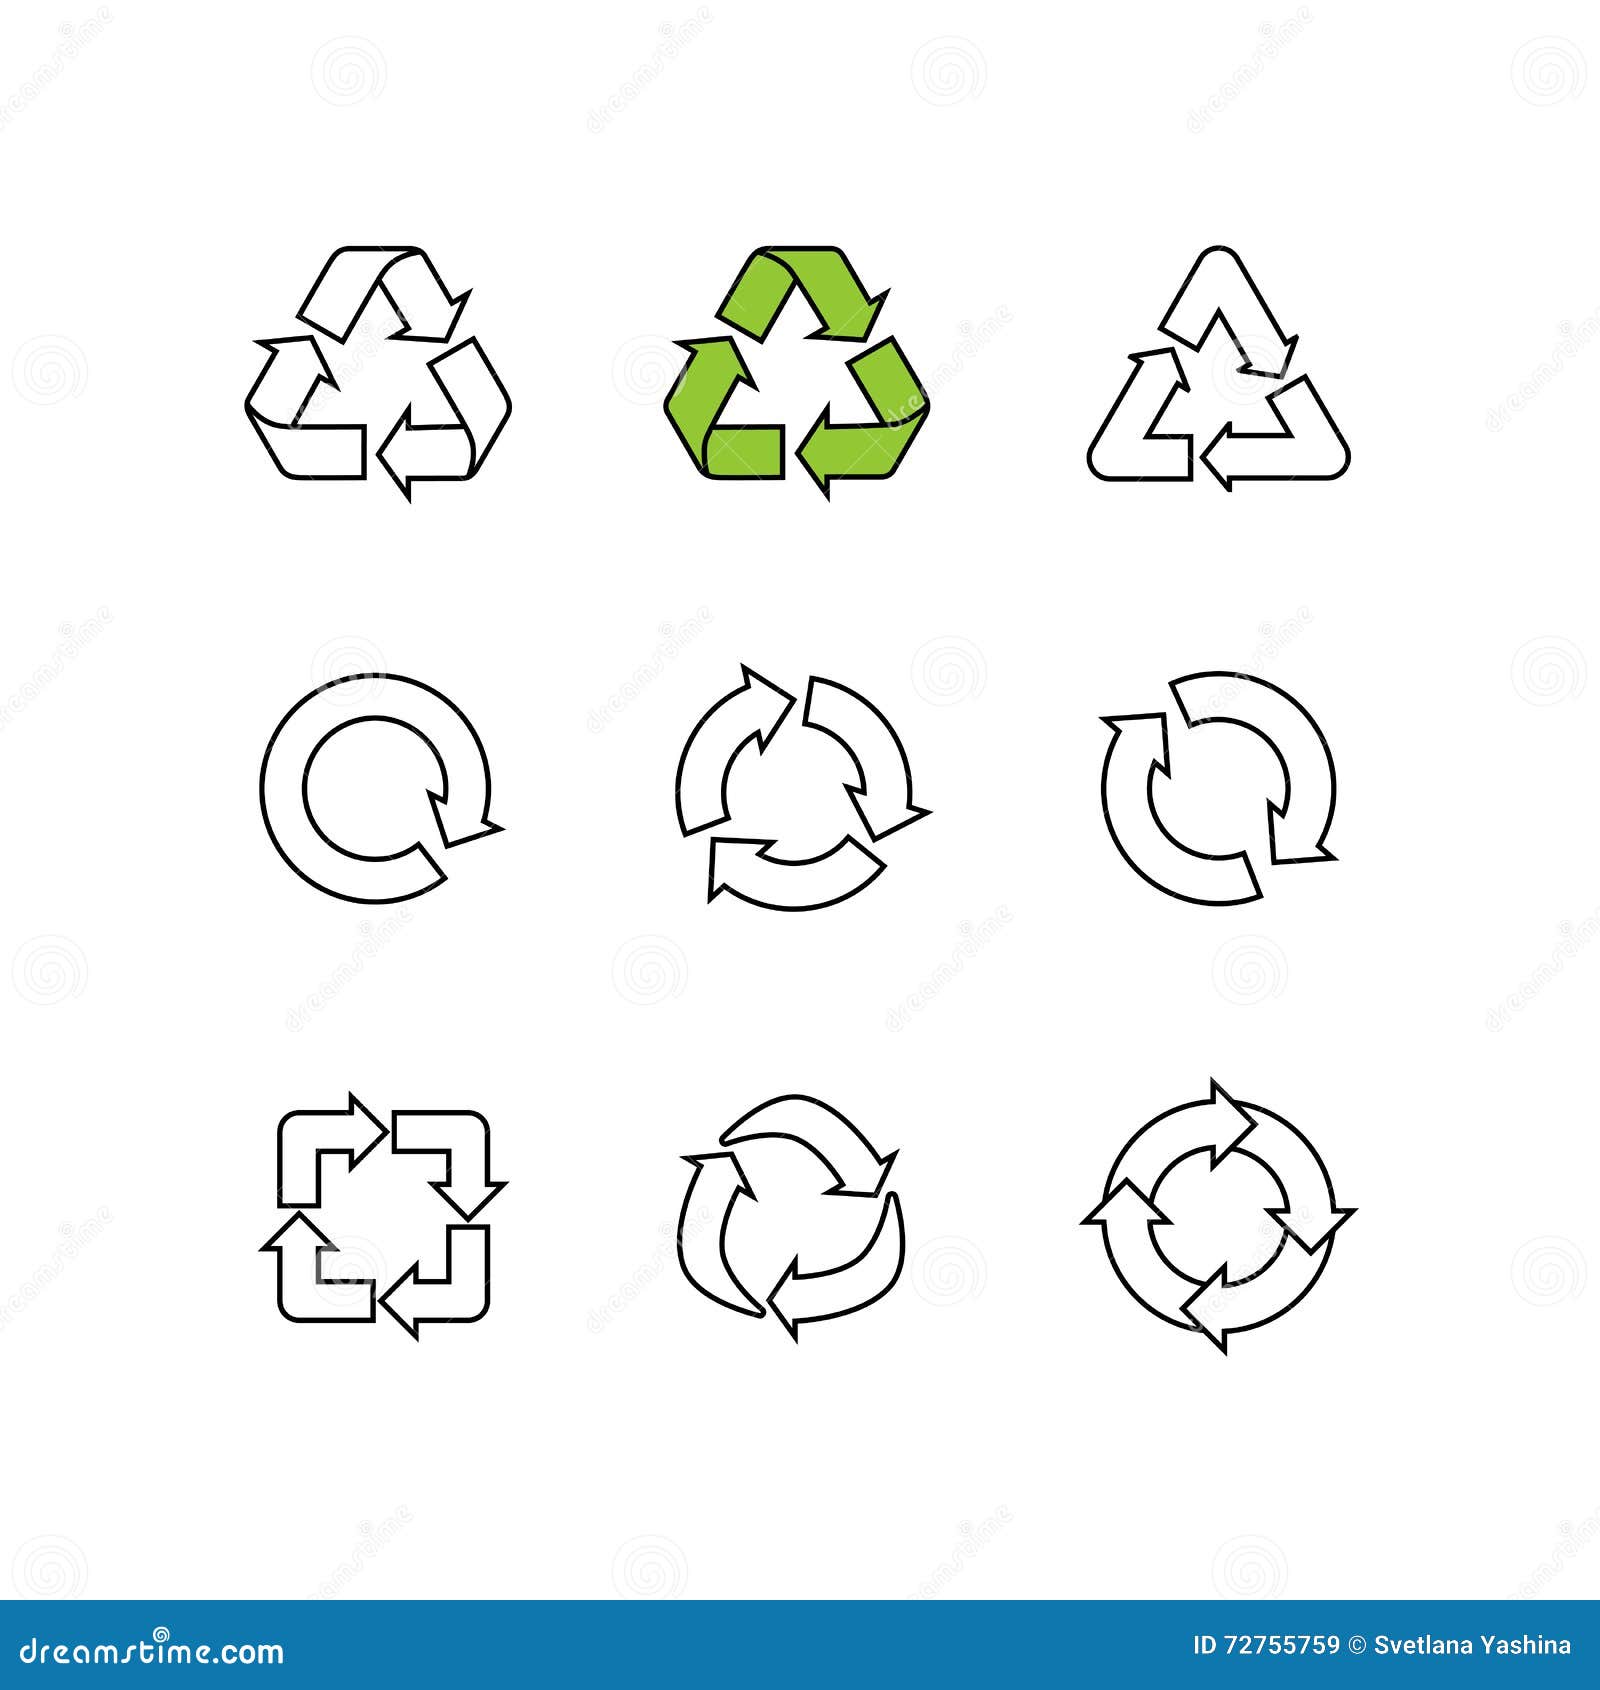 Sketch Doodle Recycle Reuse Reduce Symbol Isolated On Craft Paper  Background. Recycle Icon Sign For Ecological. Hand-drawn Style Royalty Free  SVG, Cliparts, Vectors, and Stock Illustration. Image 138507794.